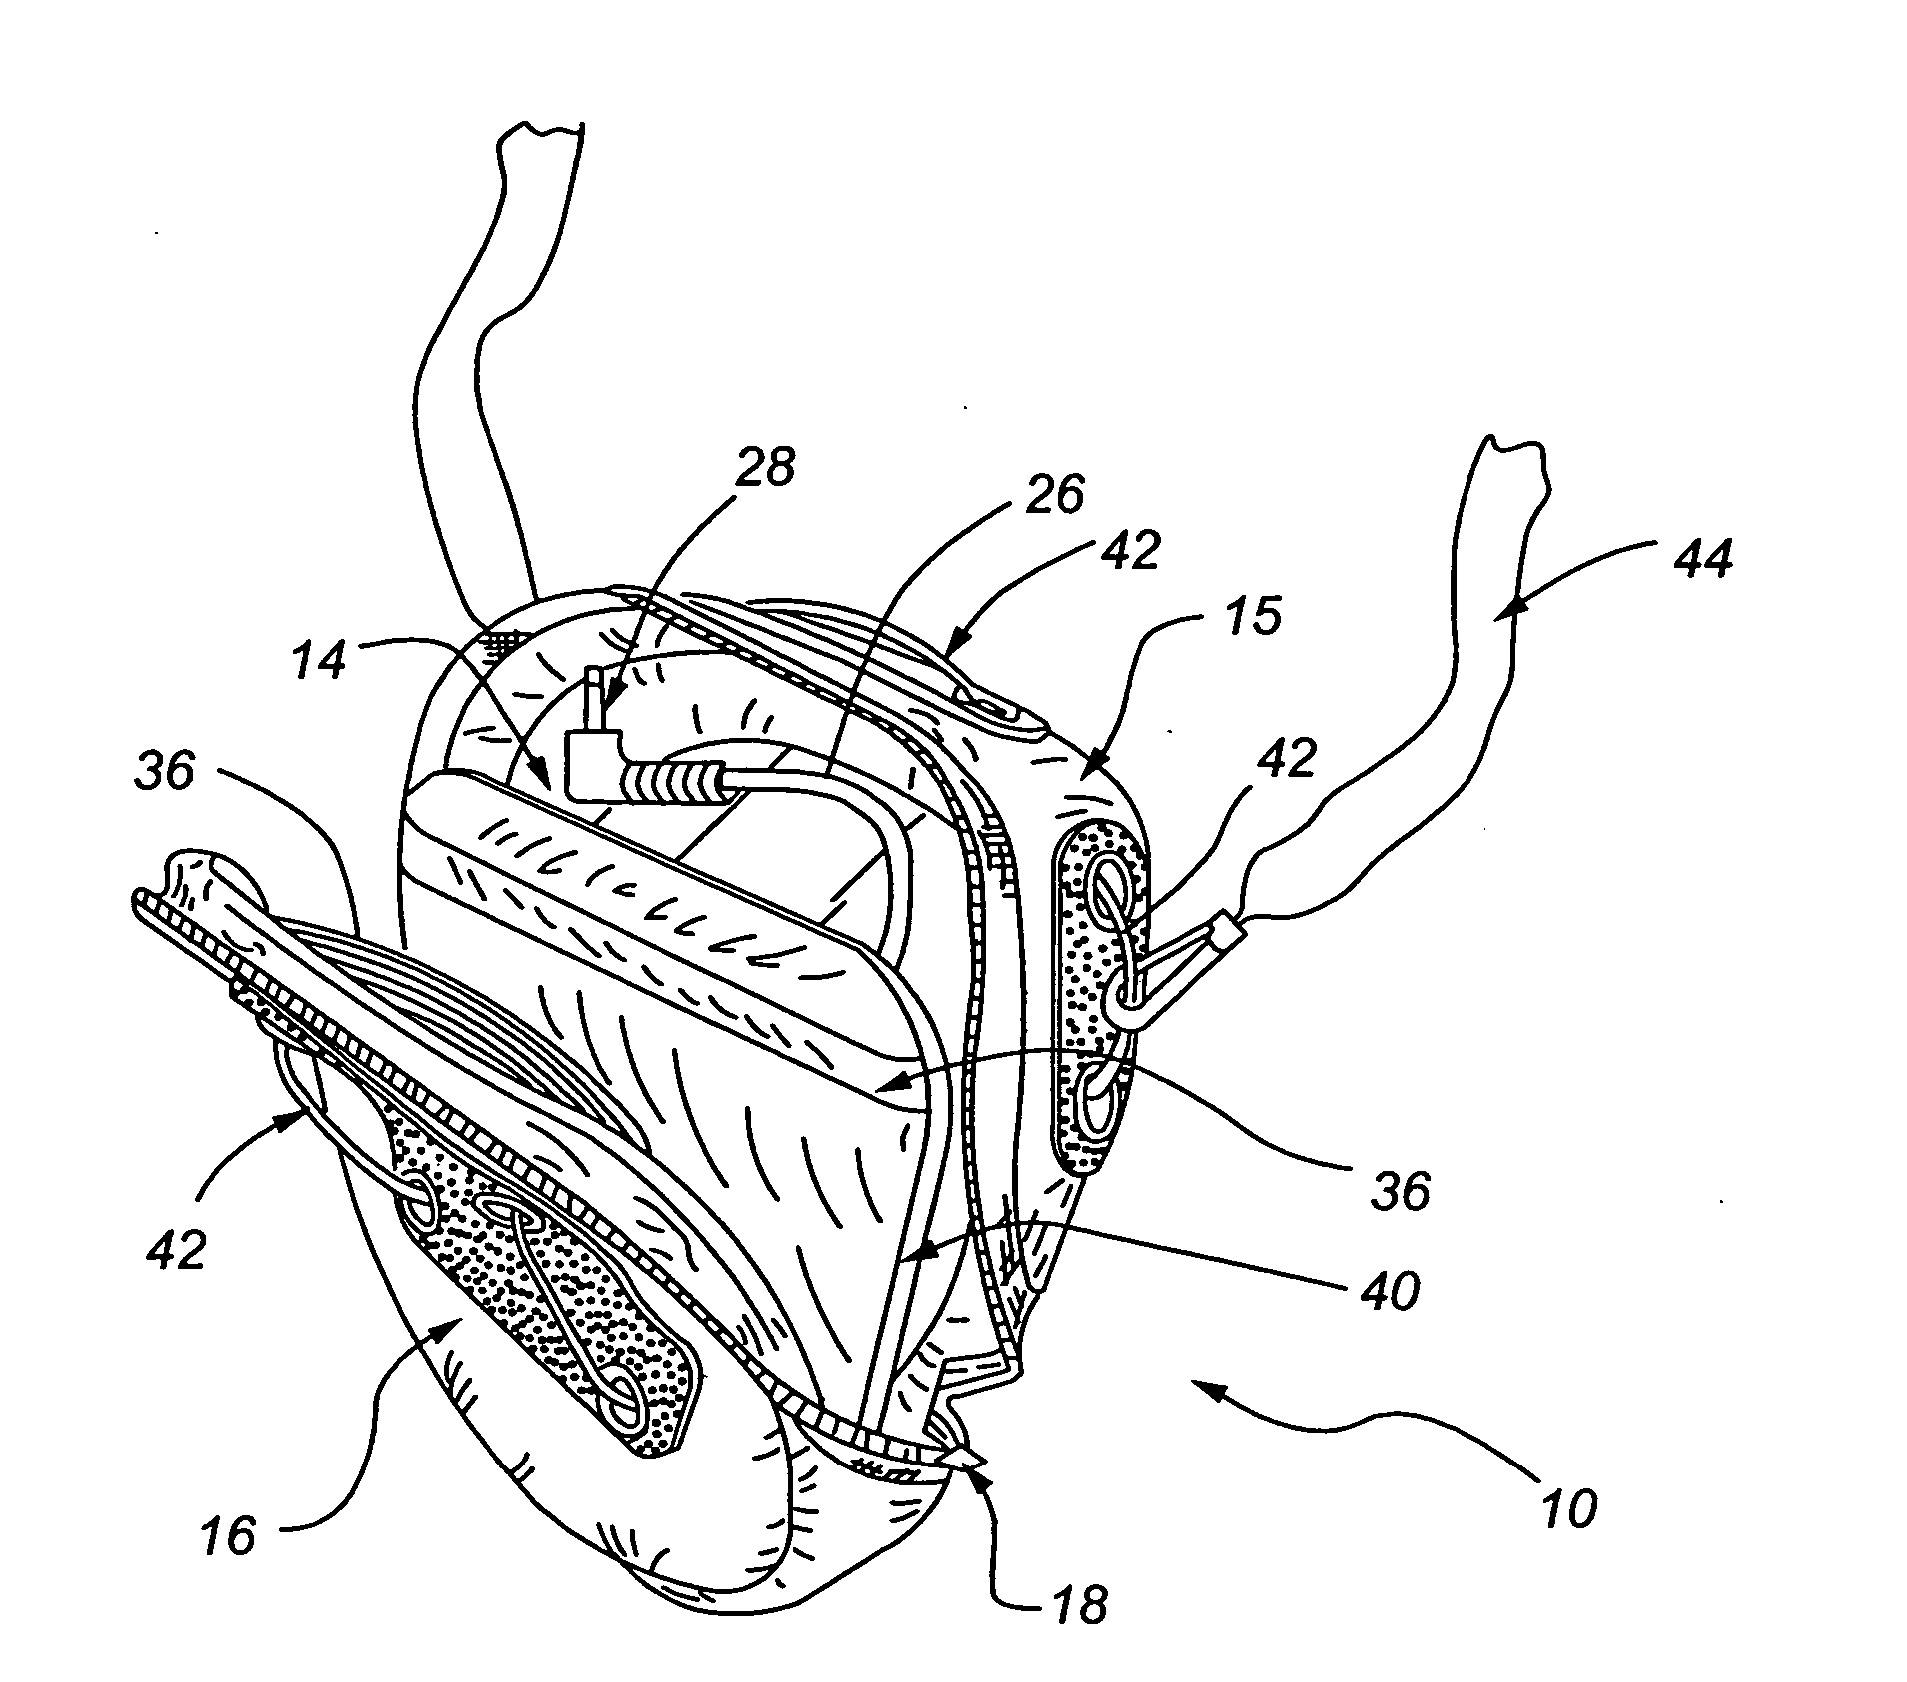 Protective enclosure with a line-out device adapted for use with electronic componentry